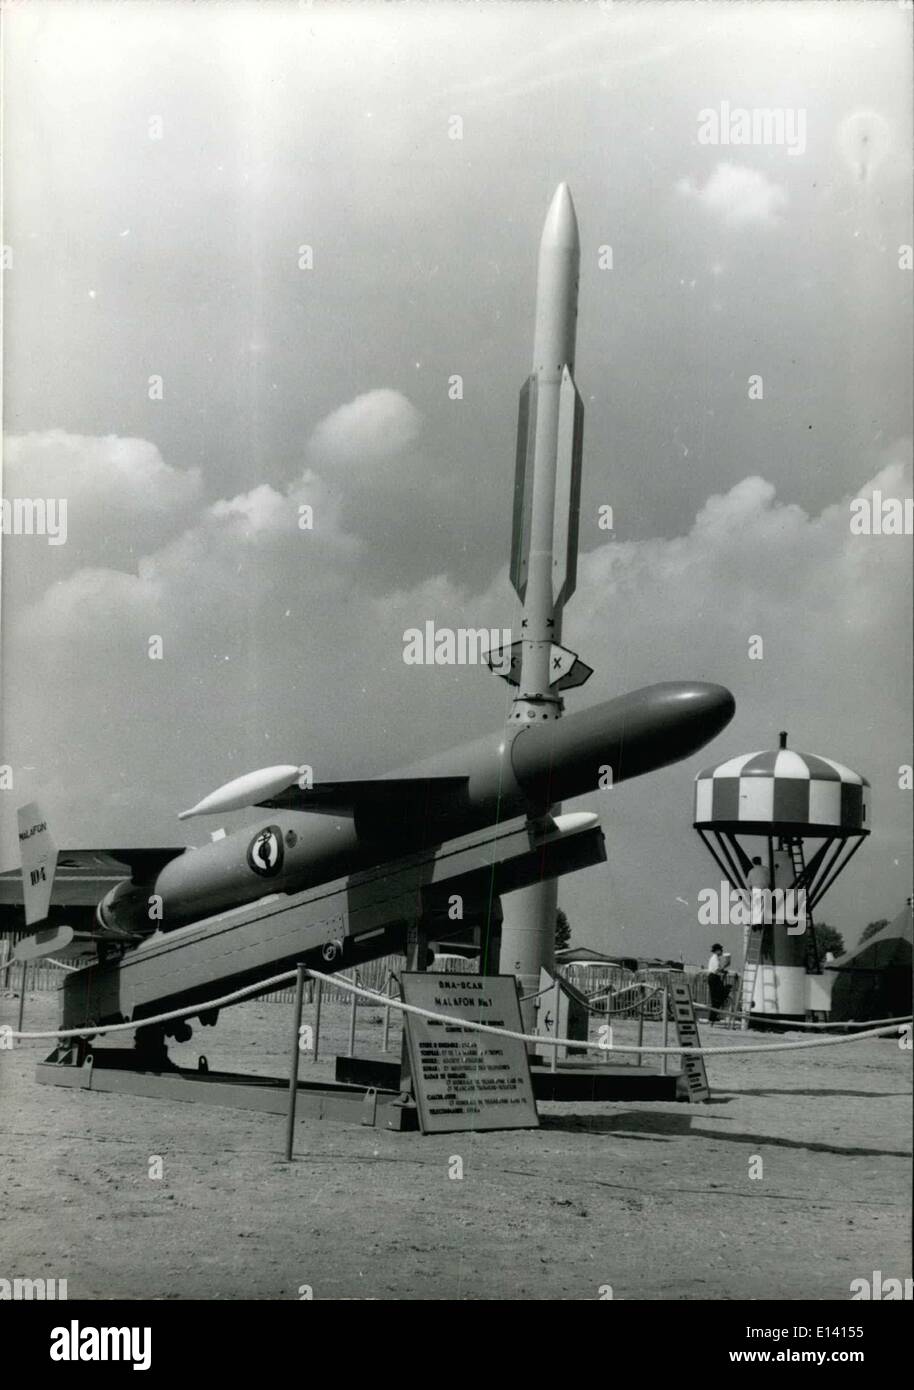 Mar. 31, 2012 - Space On Honnor At Le Bourget: The Fair At Le Bourget Keeps A Special Honnor Place For ''Space'', A Real ''Missile-Park'' Has Been Built Where The Latest Models Are Presented. Photo shows French ''Malafon Ma I'' Anti-Submarine Missile. Stock Photo